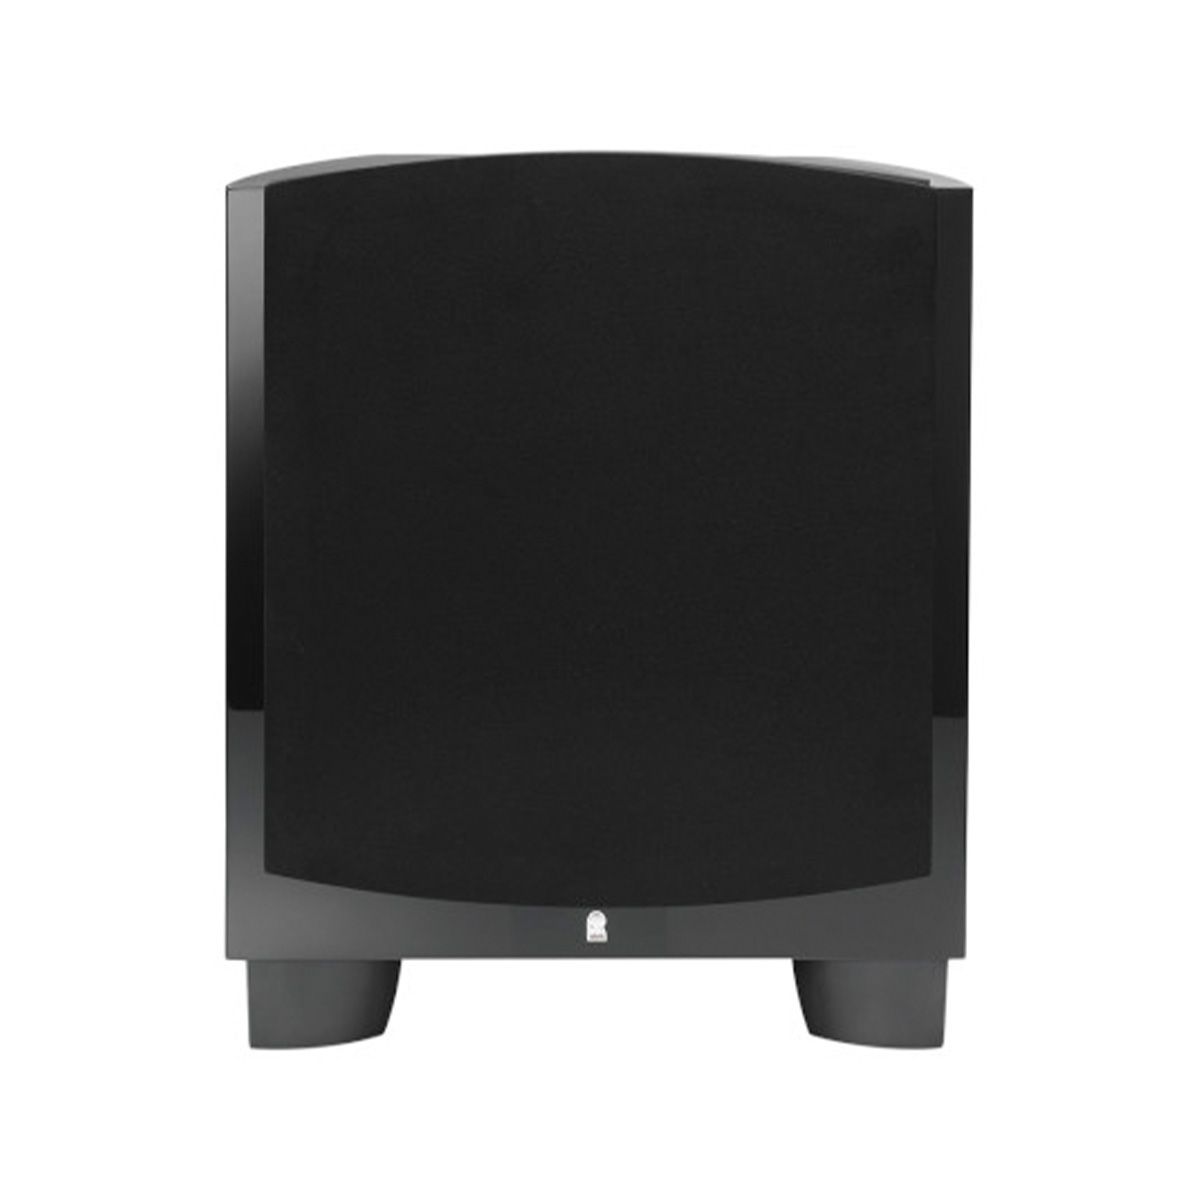 Revel B112v2 12” 1000W Powered Subwoofer - black single with grille - front view